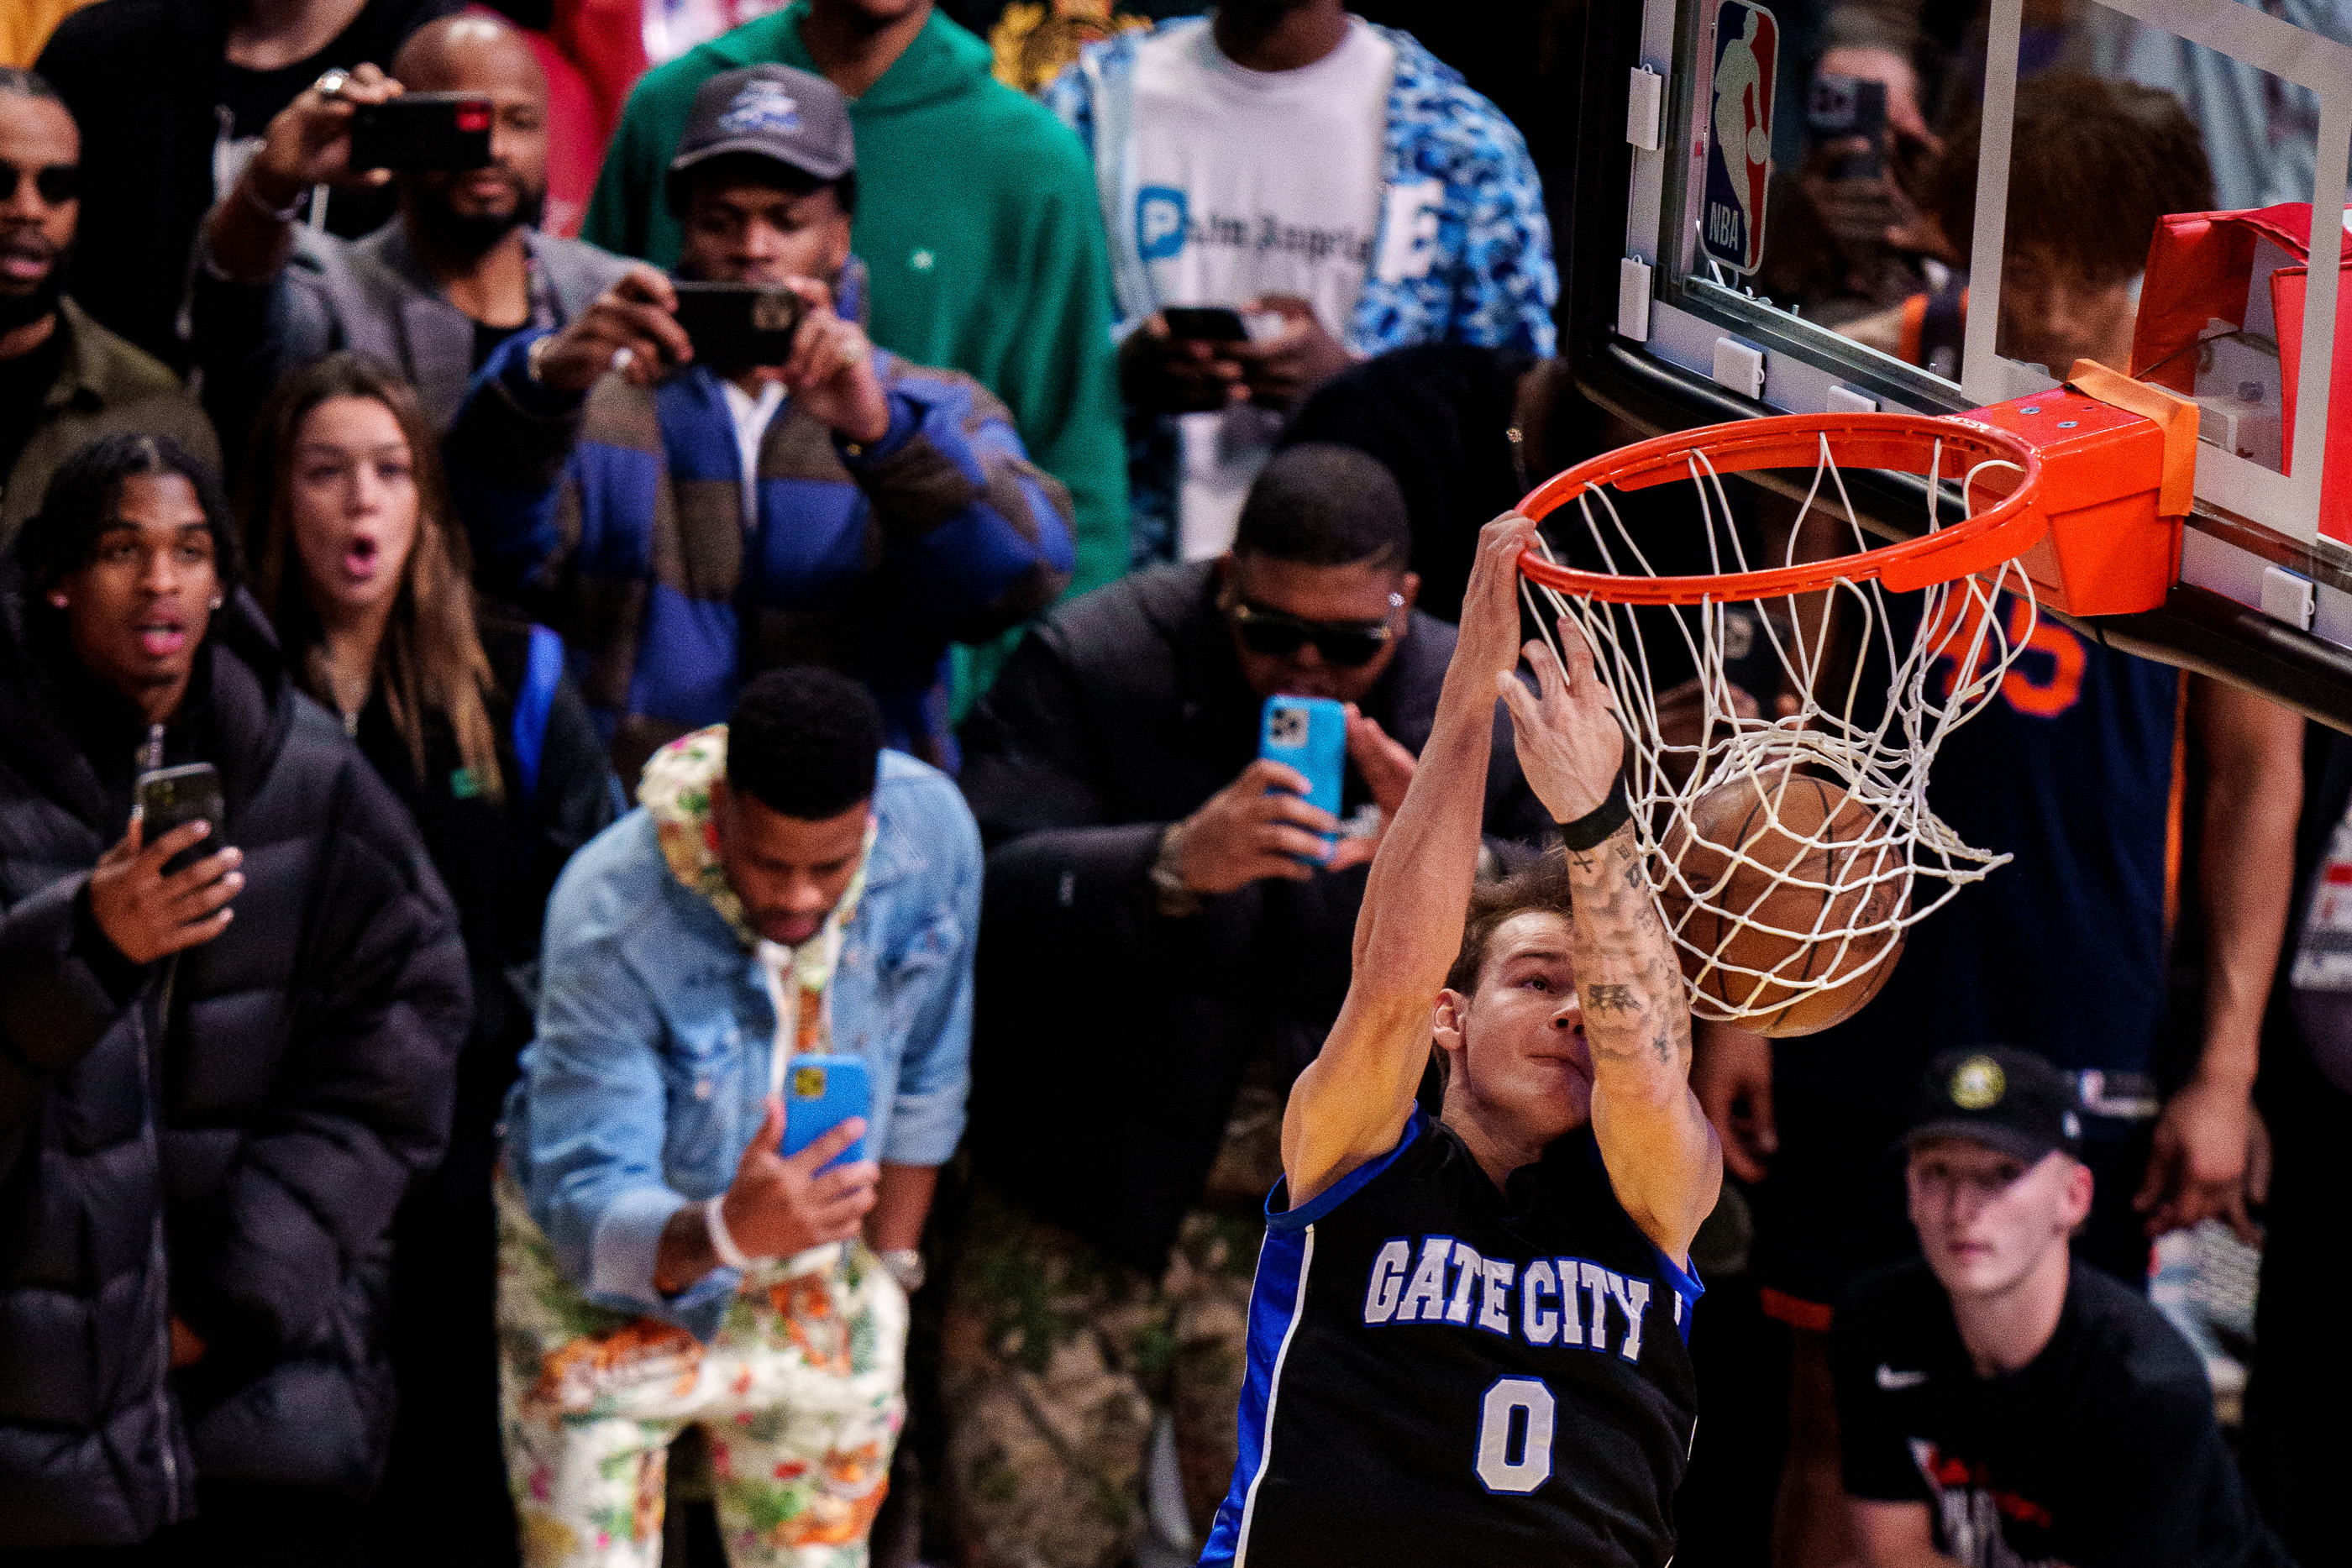 Mac McClung, who has played 2 NBA games, goes from viral dunk fame